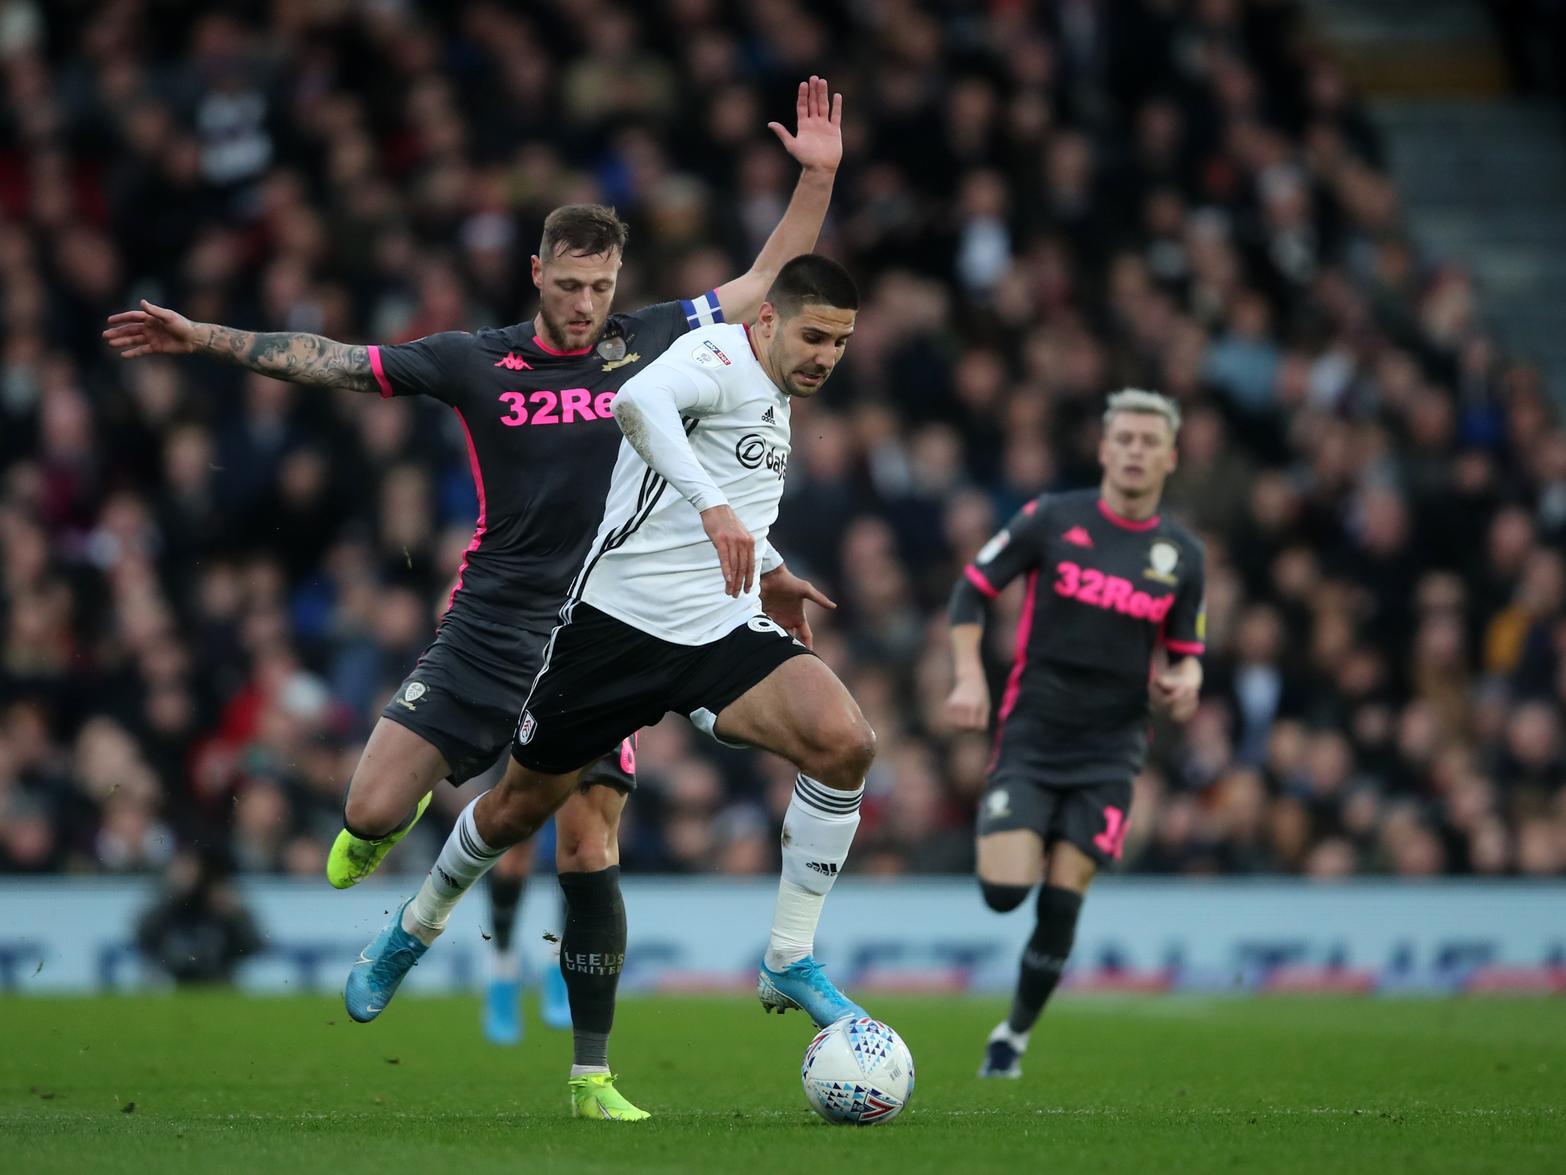 Aleksandar Mitrovic (Fulham) - a real handful for Leeds at Craven Cottage. Plays the game with a chip on his shoulder, and probably shouldn't be at this level.